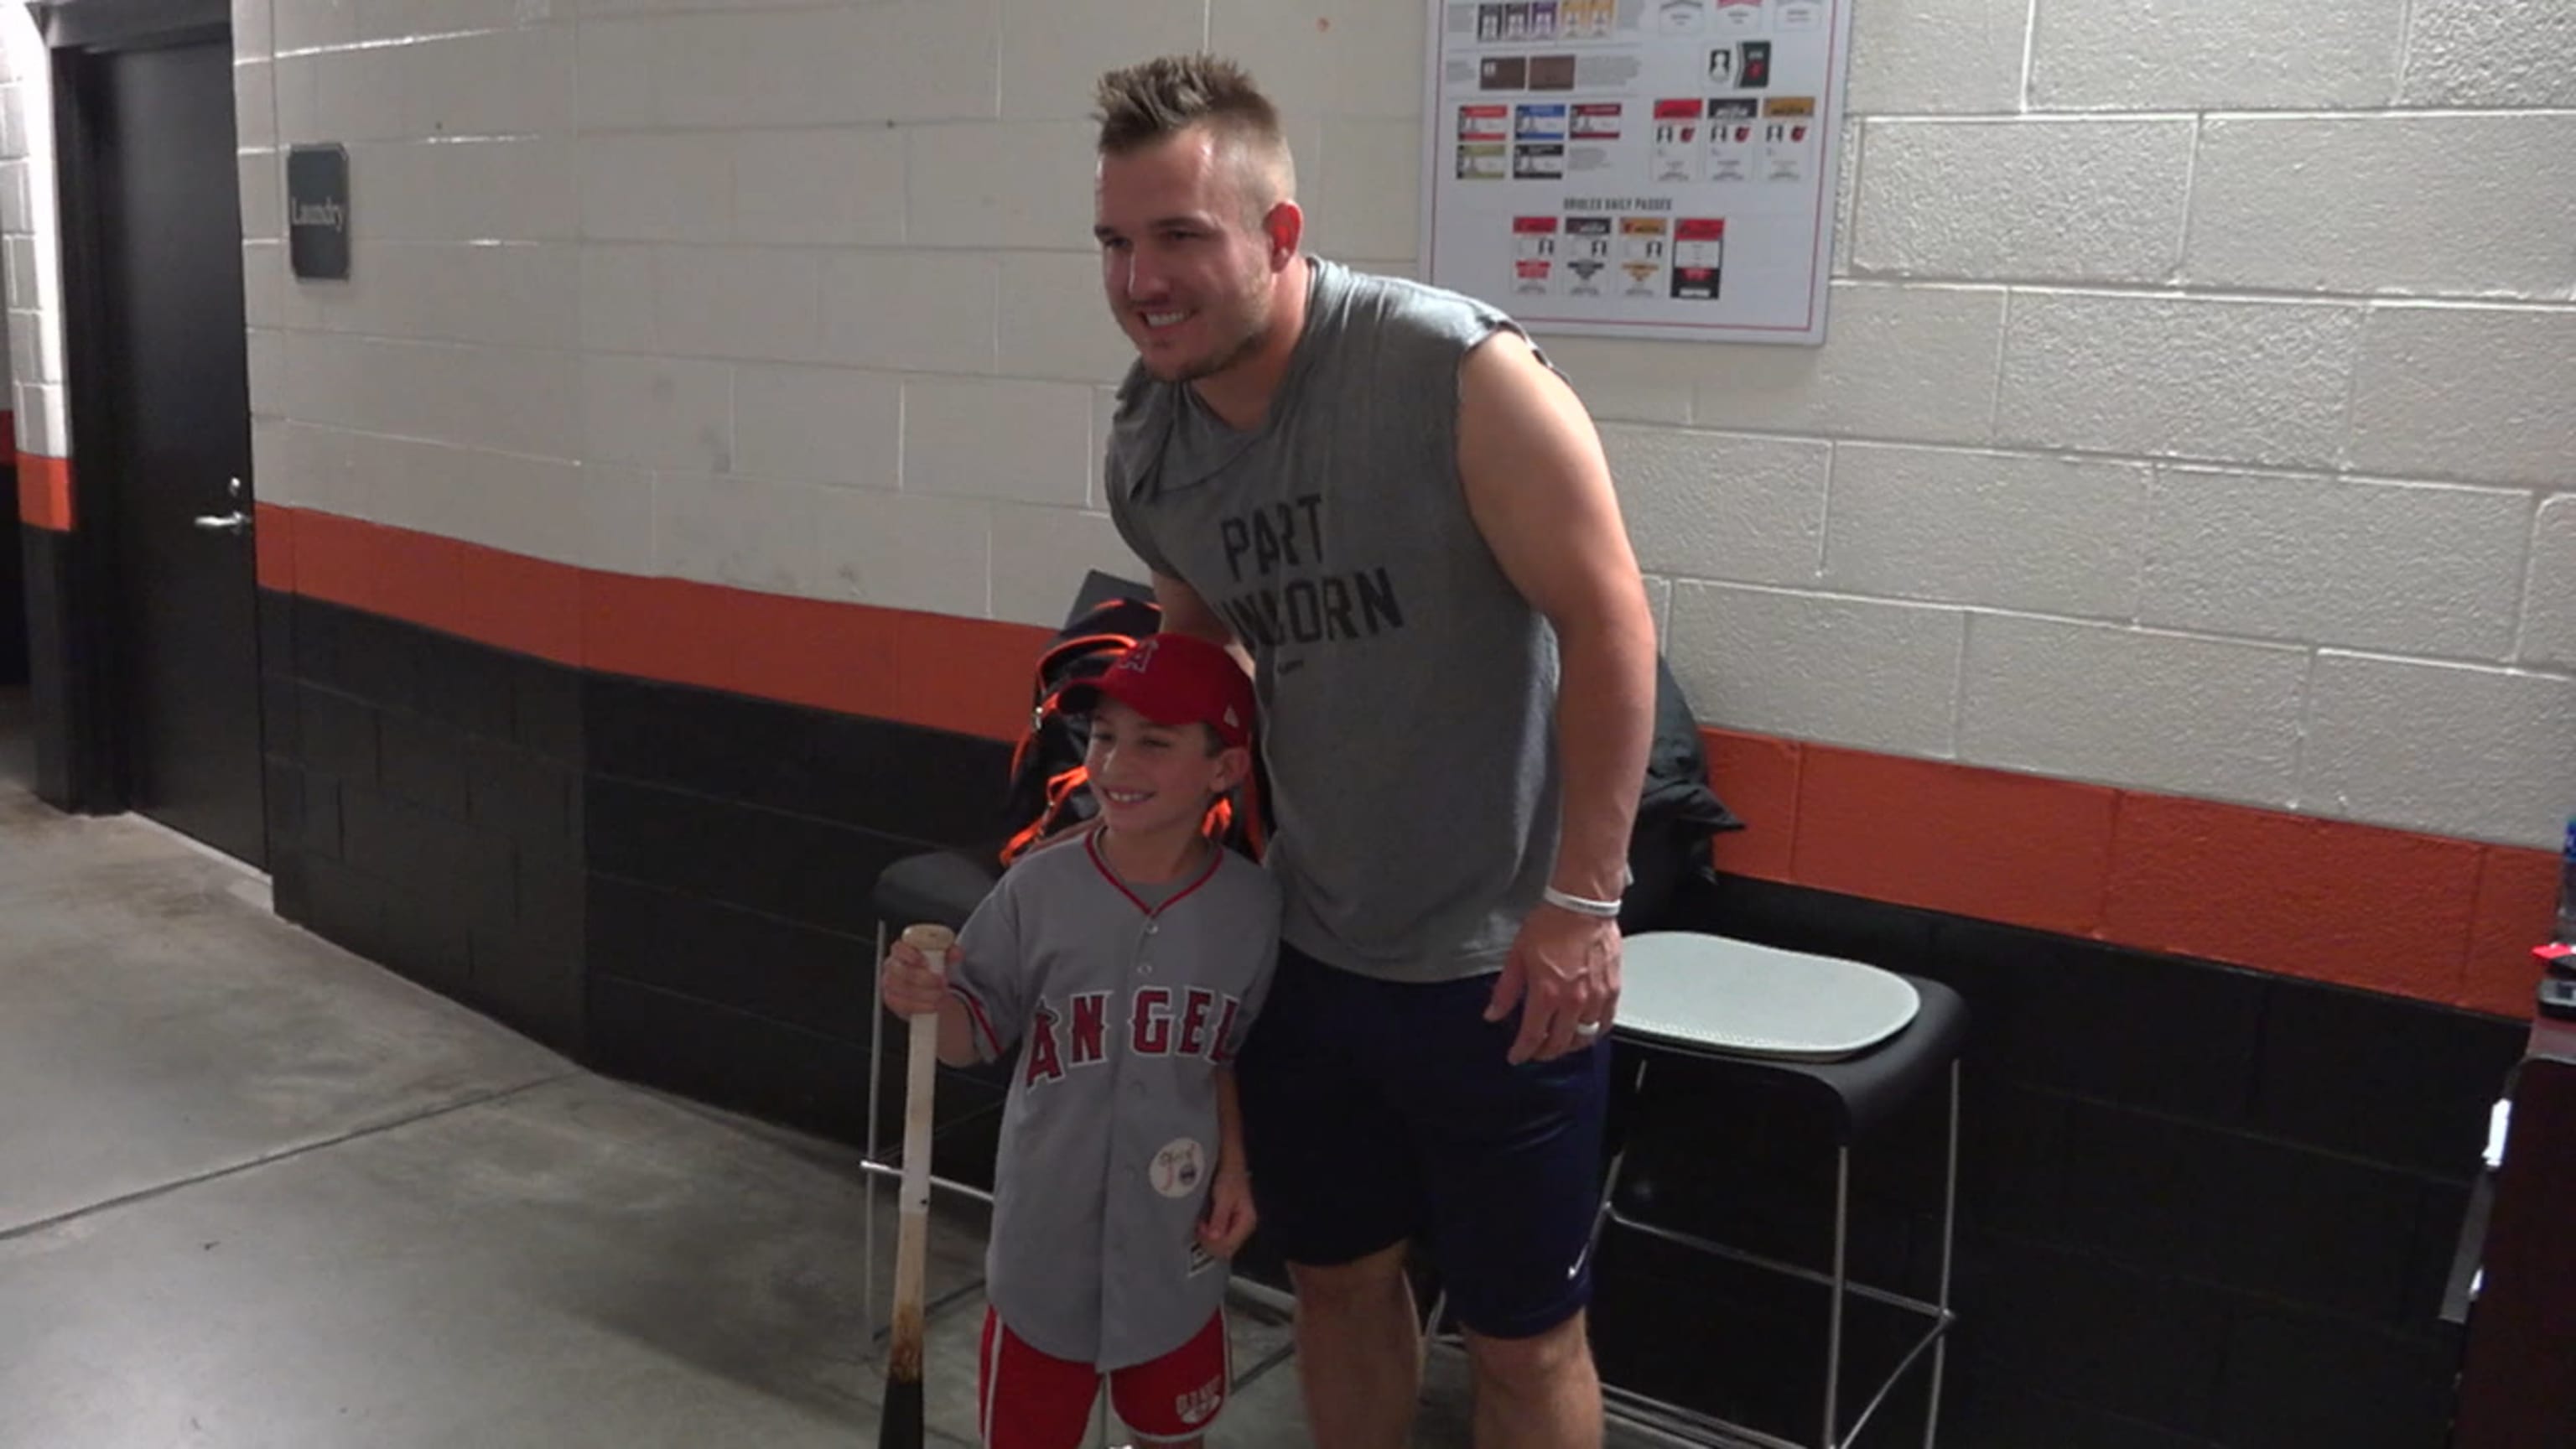 Trout and young fan in Baltimore have close connection